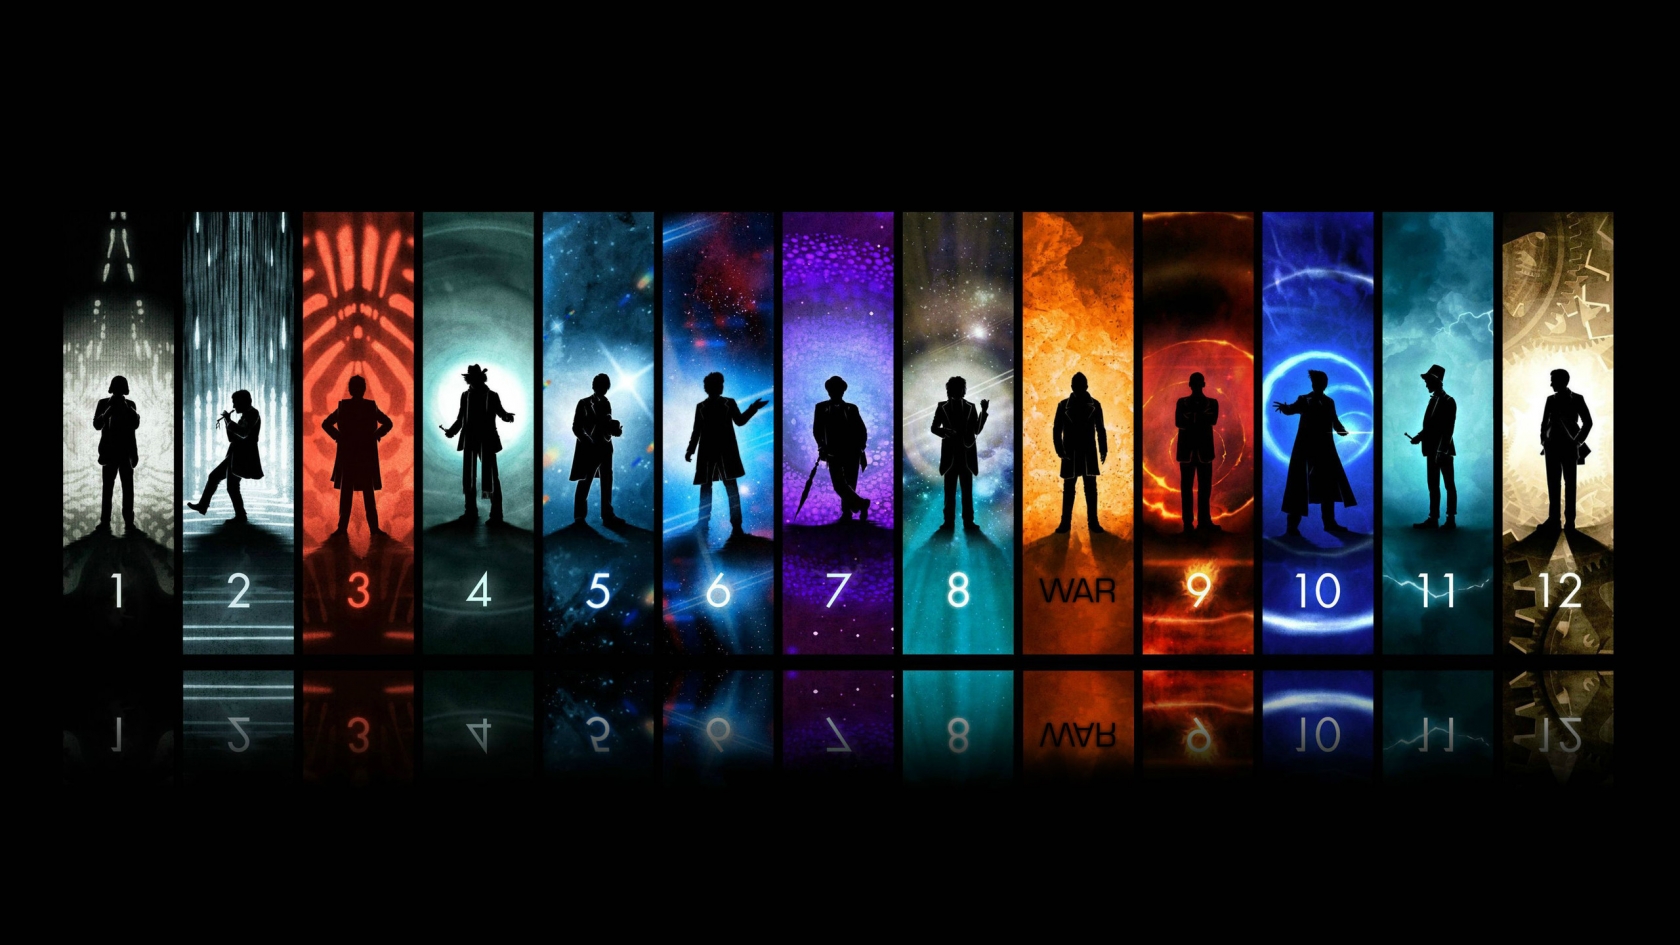 Heroes Reborn Characters for 1680 x 945 HDTV resolution